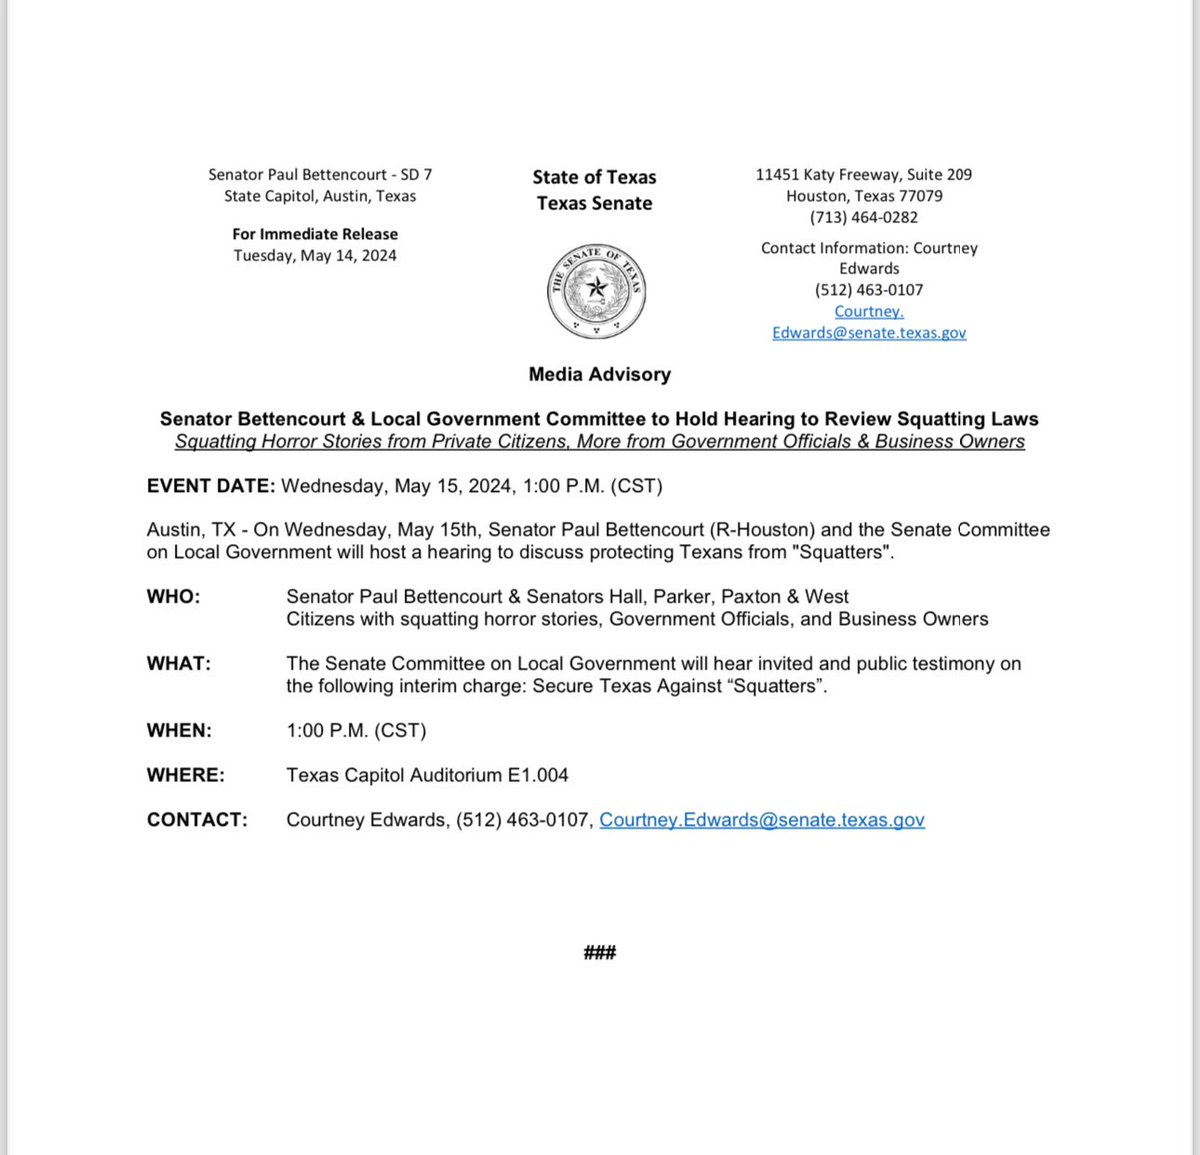 🚨 Don't miss the big hearing 🚨 Secure Texas Against “Squatters”.  Join me today for the Local Government Committee Hearing to Review Texas Squatting Laws. Hear squatting Horror Stories from Private Citizens and from Government Officials & Business Owners on why we need stricter